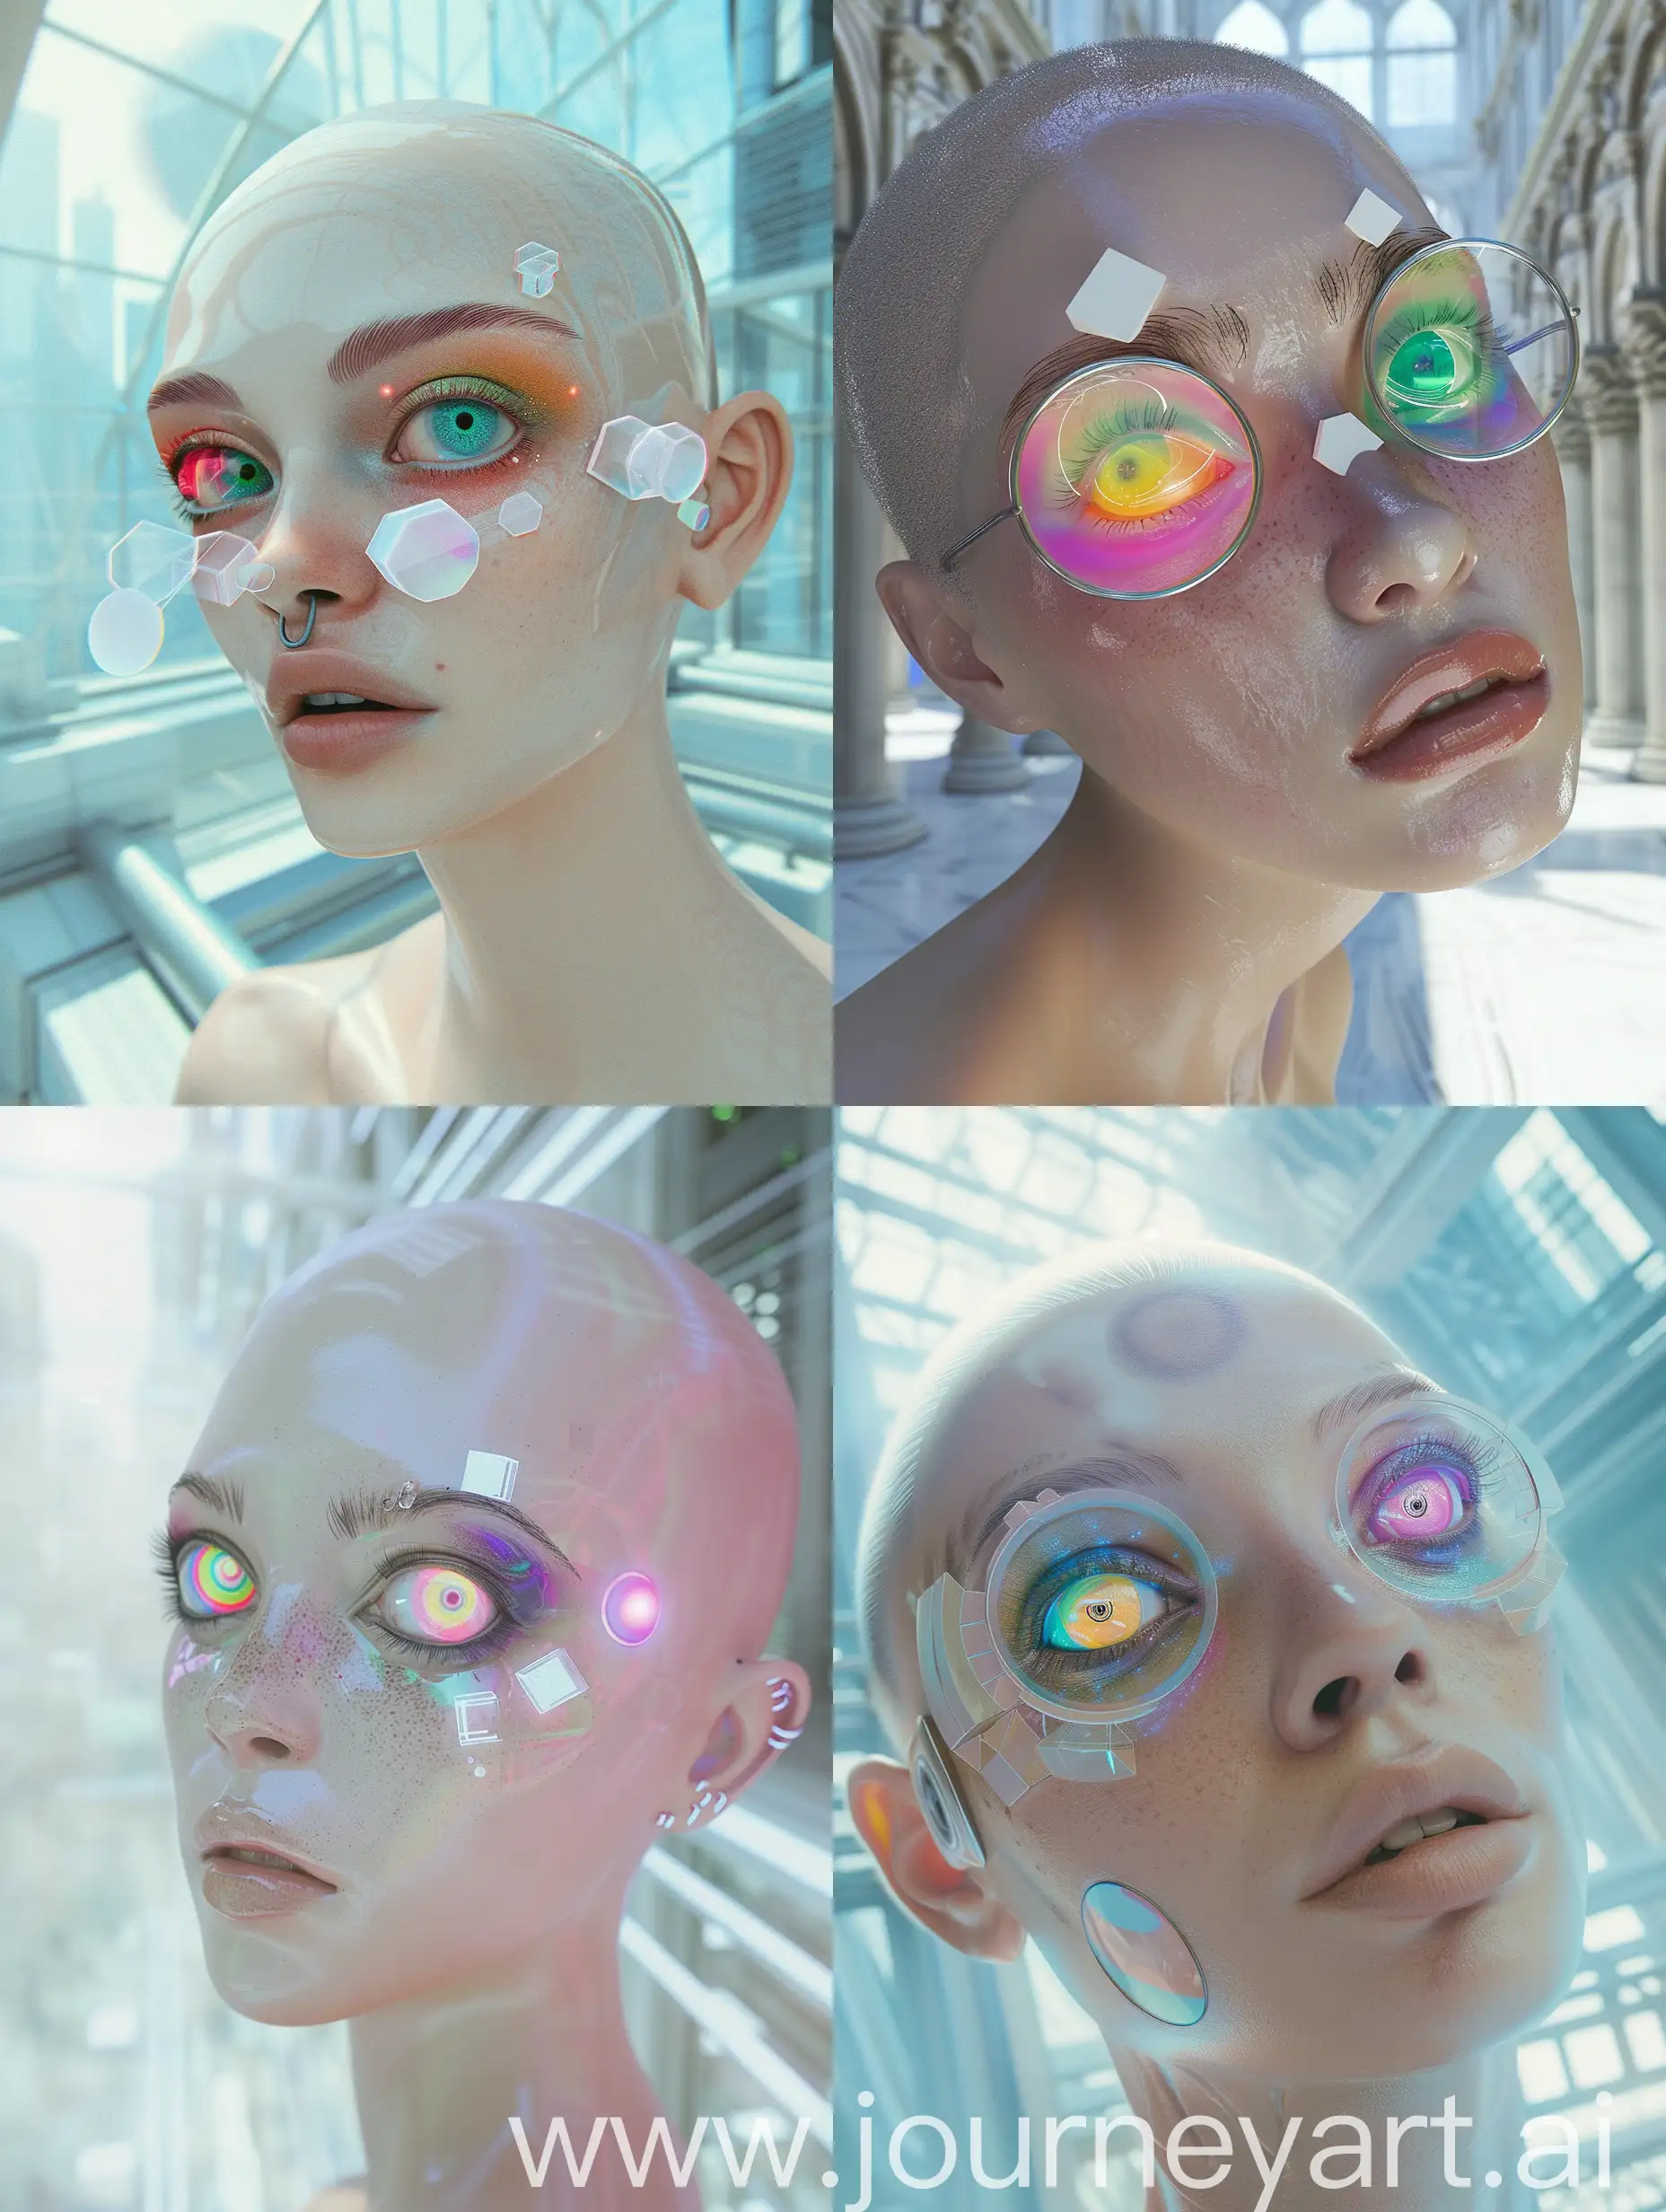 Ethereal-Cybergoth-Woman-Abstract-Minimalism-with-Vivid-Eyes-and-Nanotech-Adornments